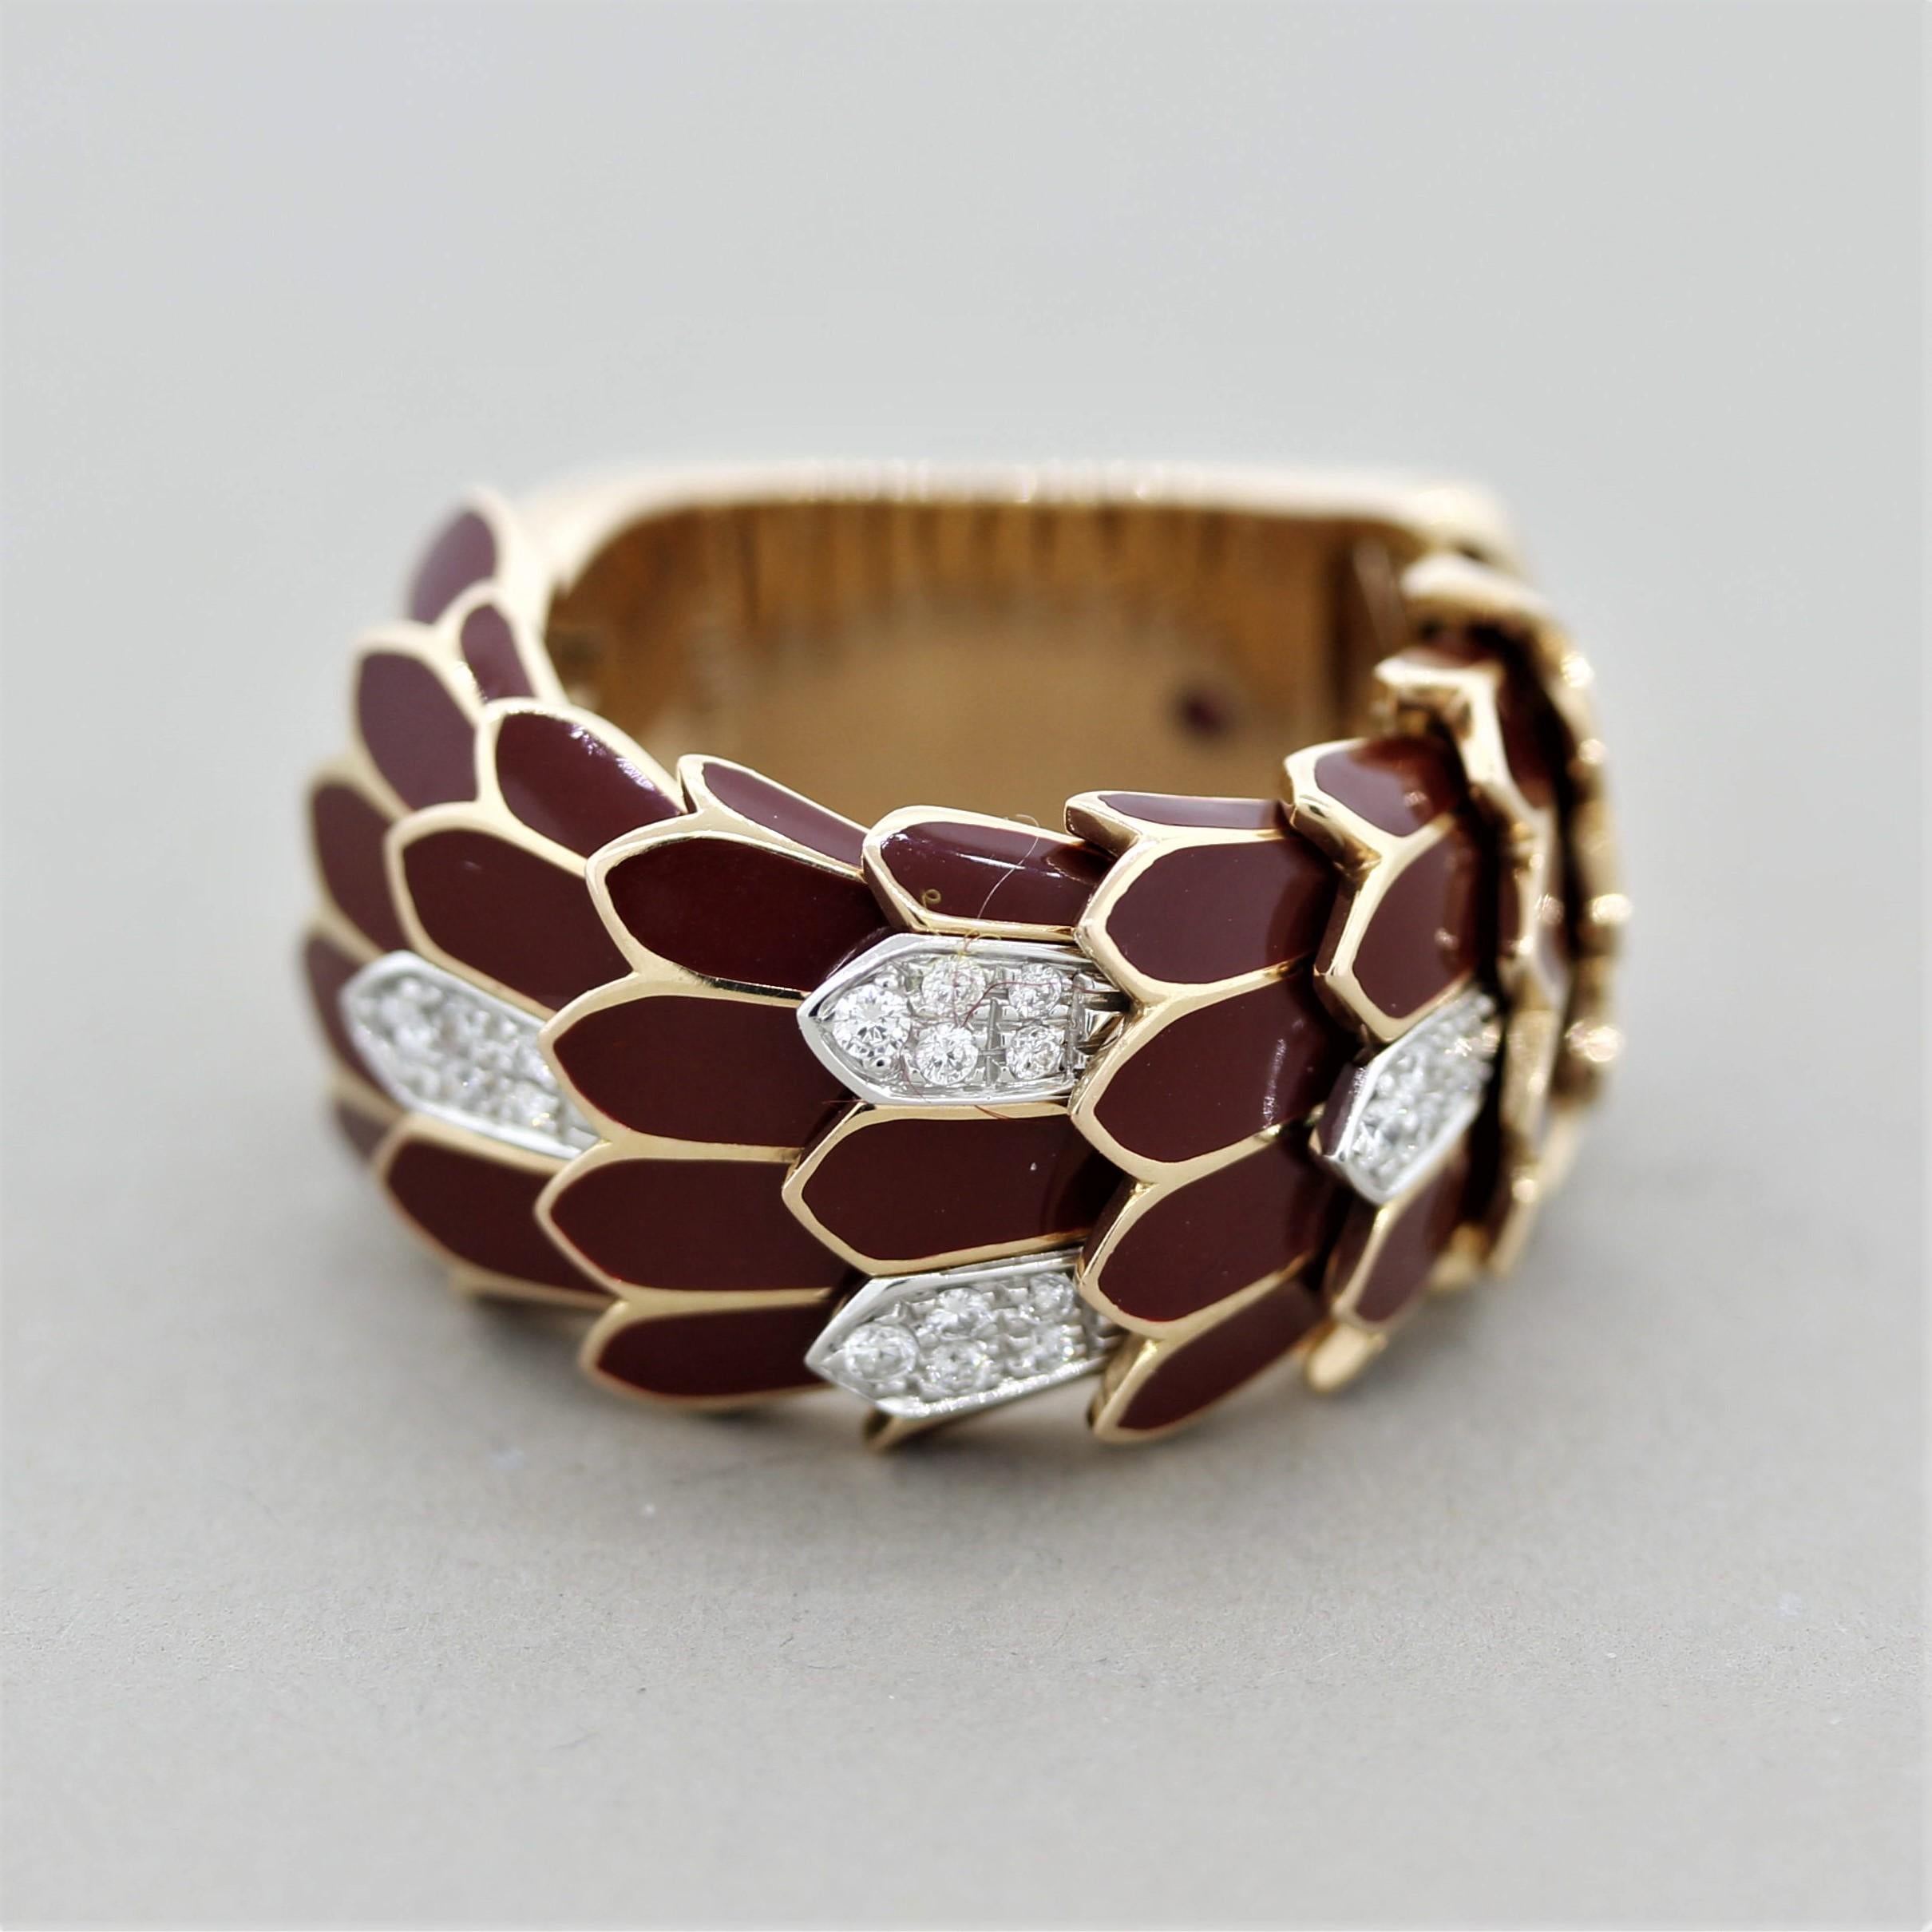 A chic and sexy Italian made ring. It features maroon-red enameling and 0.25 carats of round cut diamonds which are set over scales of a snake! Typical of a Bulgari design, this Italian made piece shows the quality of the Italian workmanship. Made